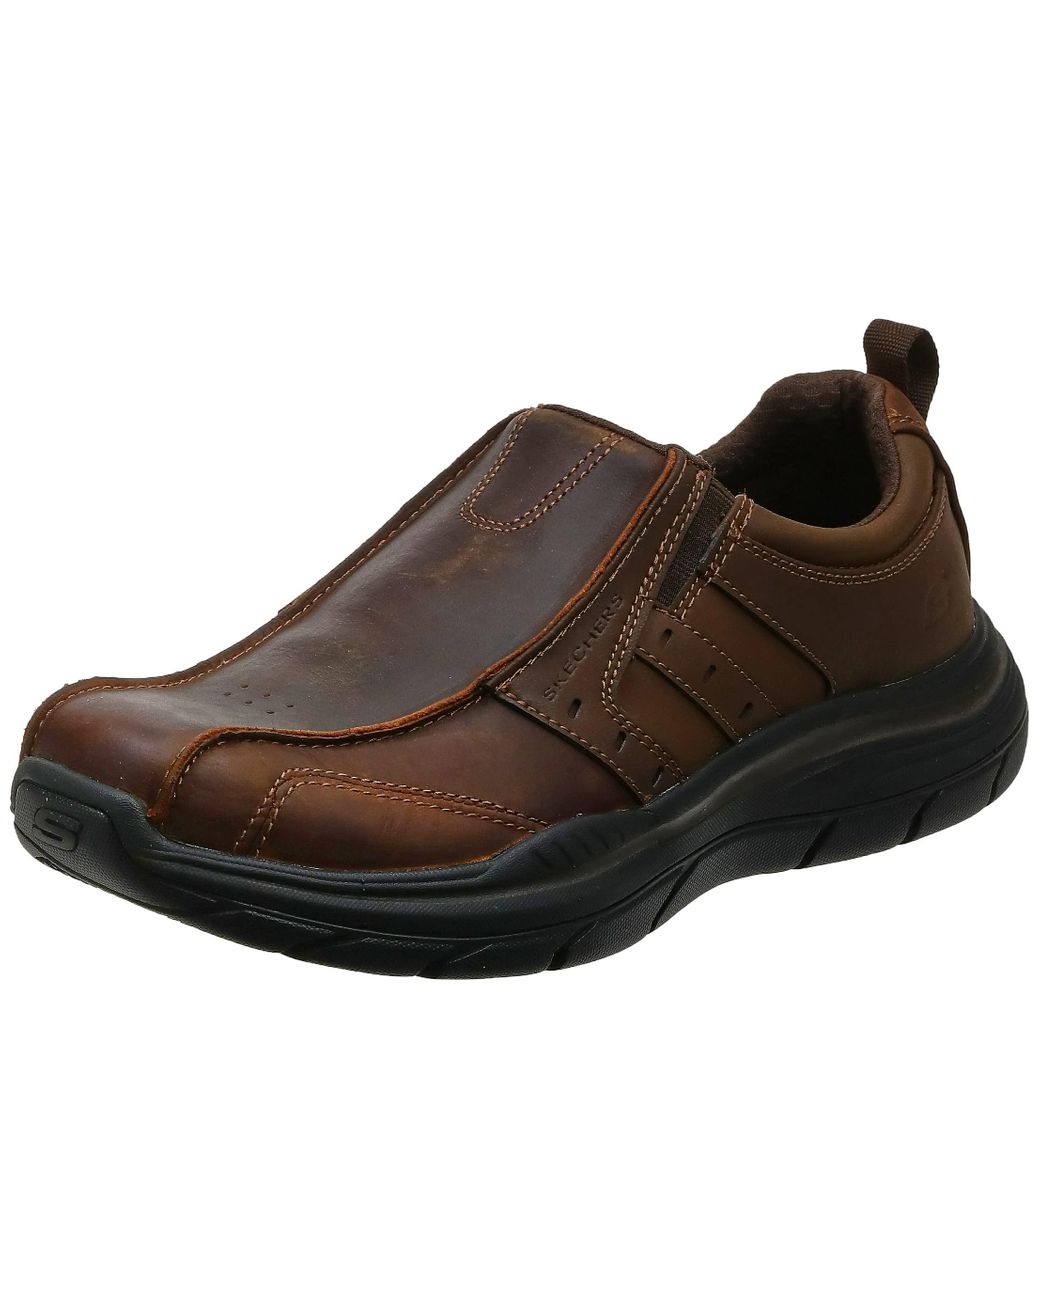 Skechers Expected 2.0-wildon Leather Slip On Moccasin in Dark Brown (Brown) for  Men - Save 56% - Lyst